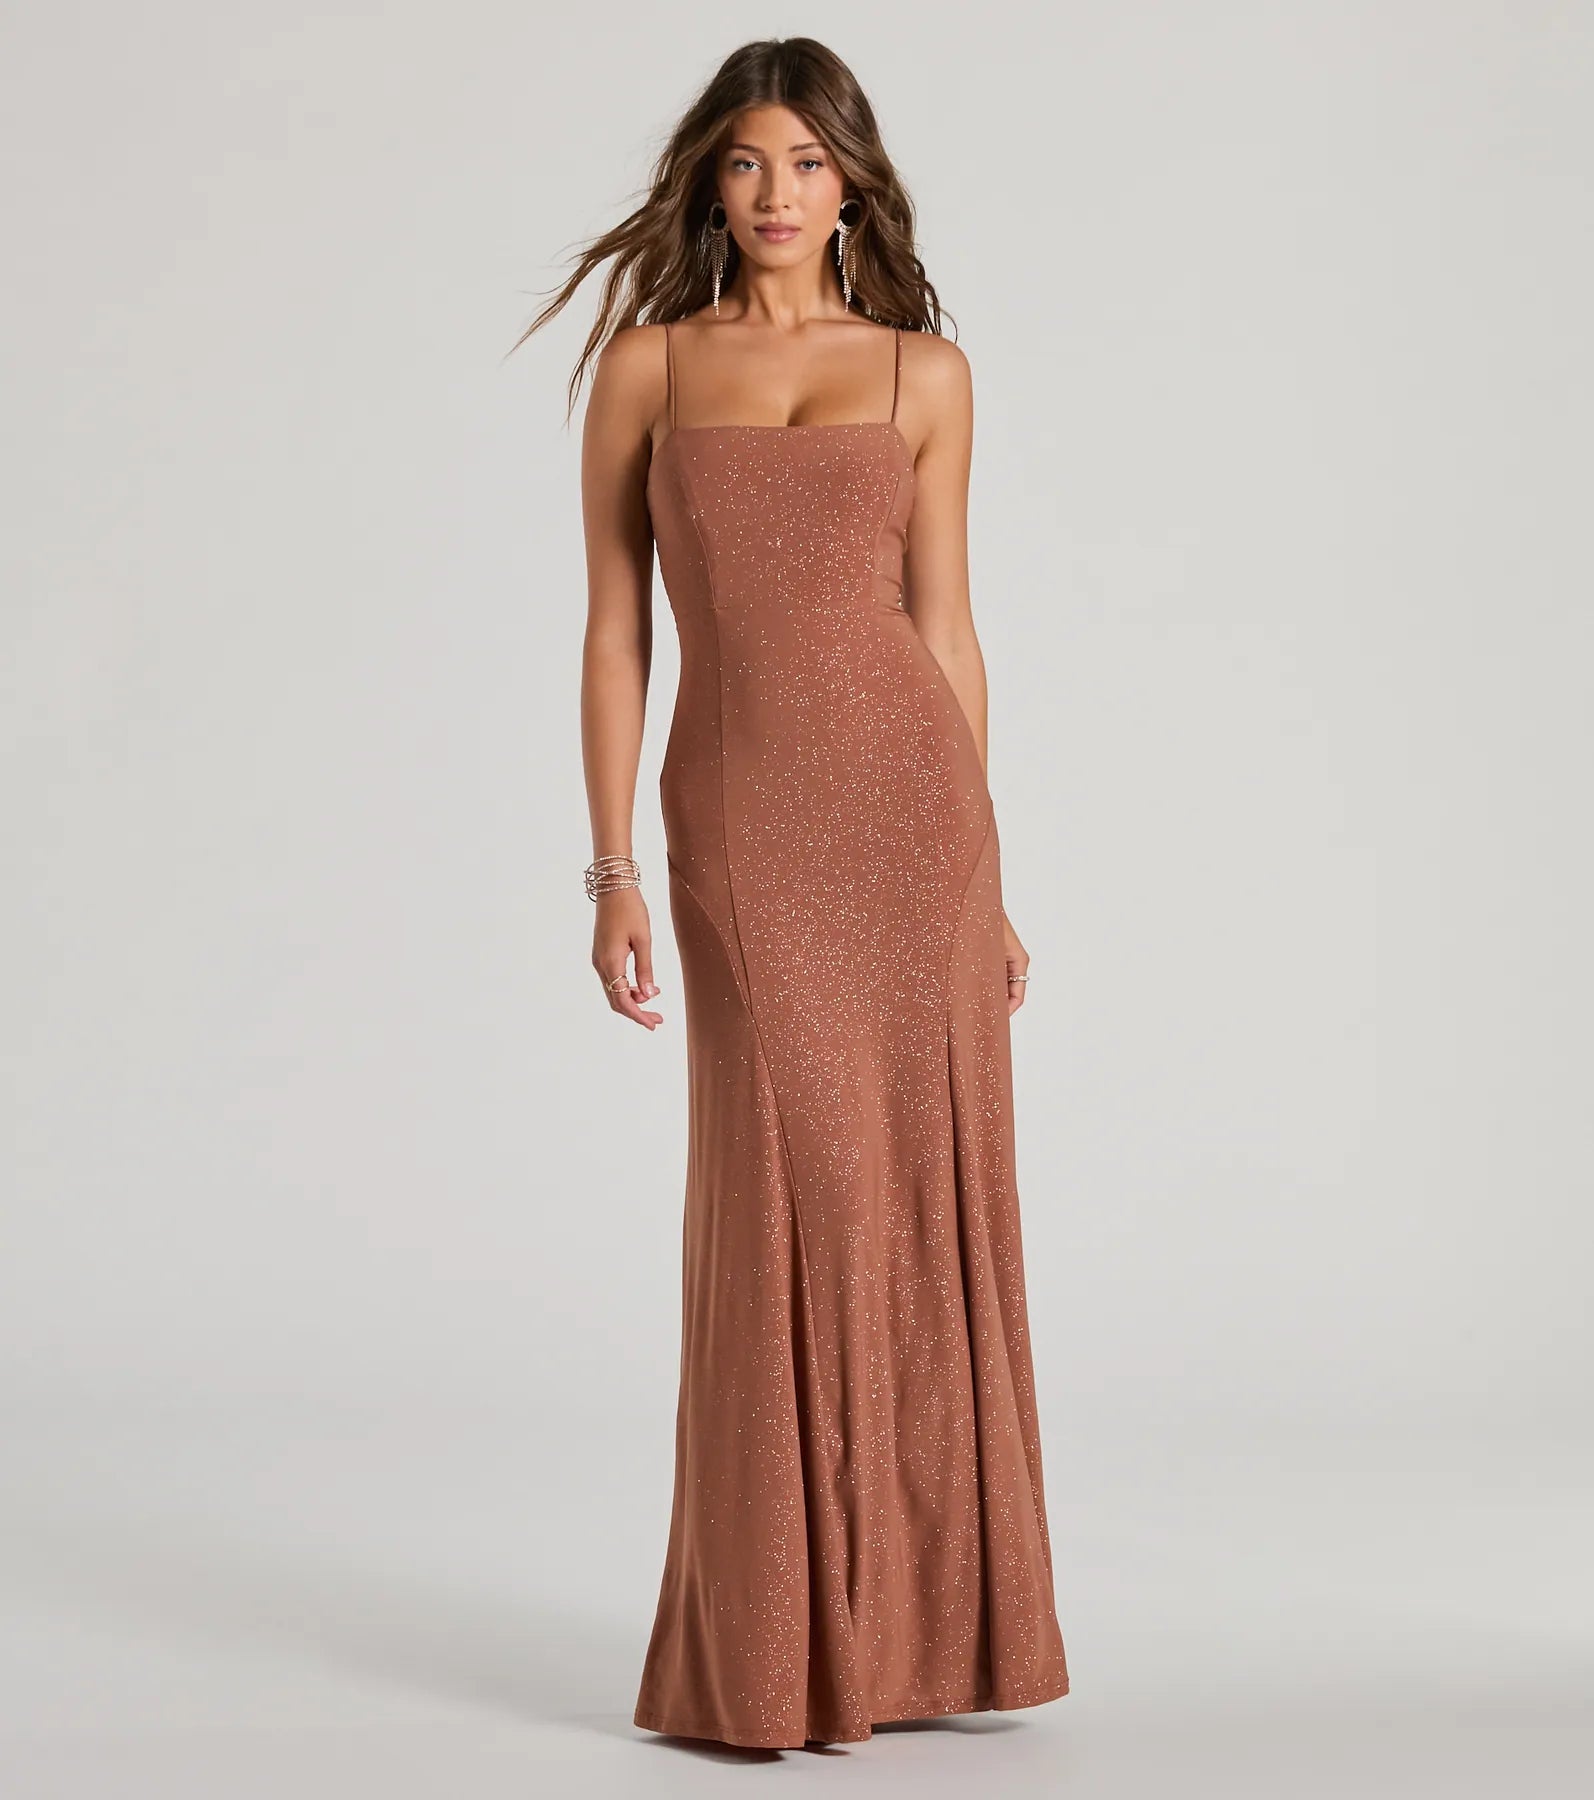 A-line Square Neck Sleeveless Spaghetti Strap Knit Stretchy Glittering Floor Length Party Dress